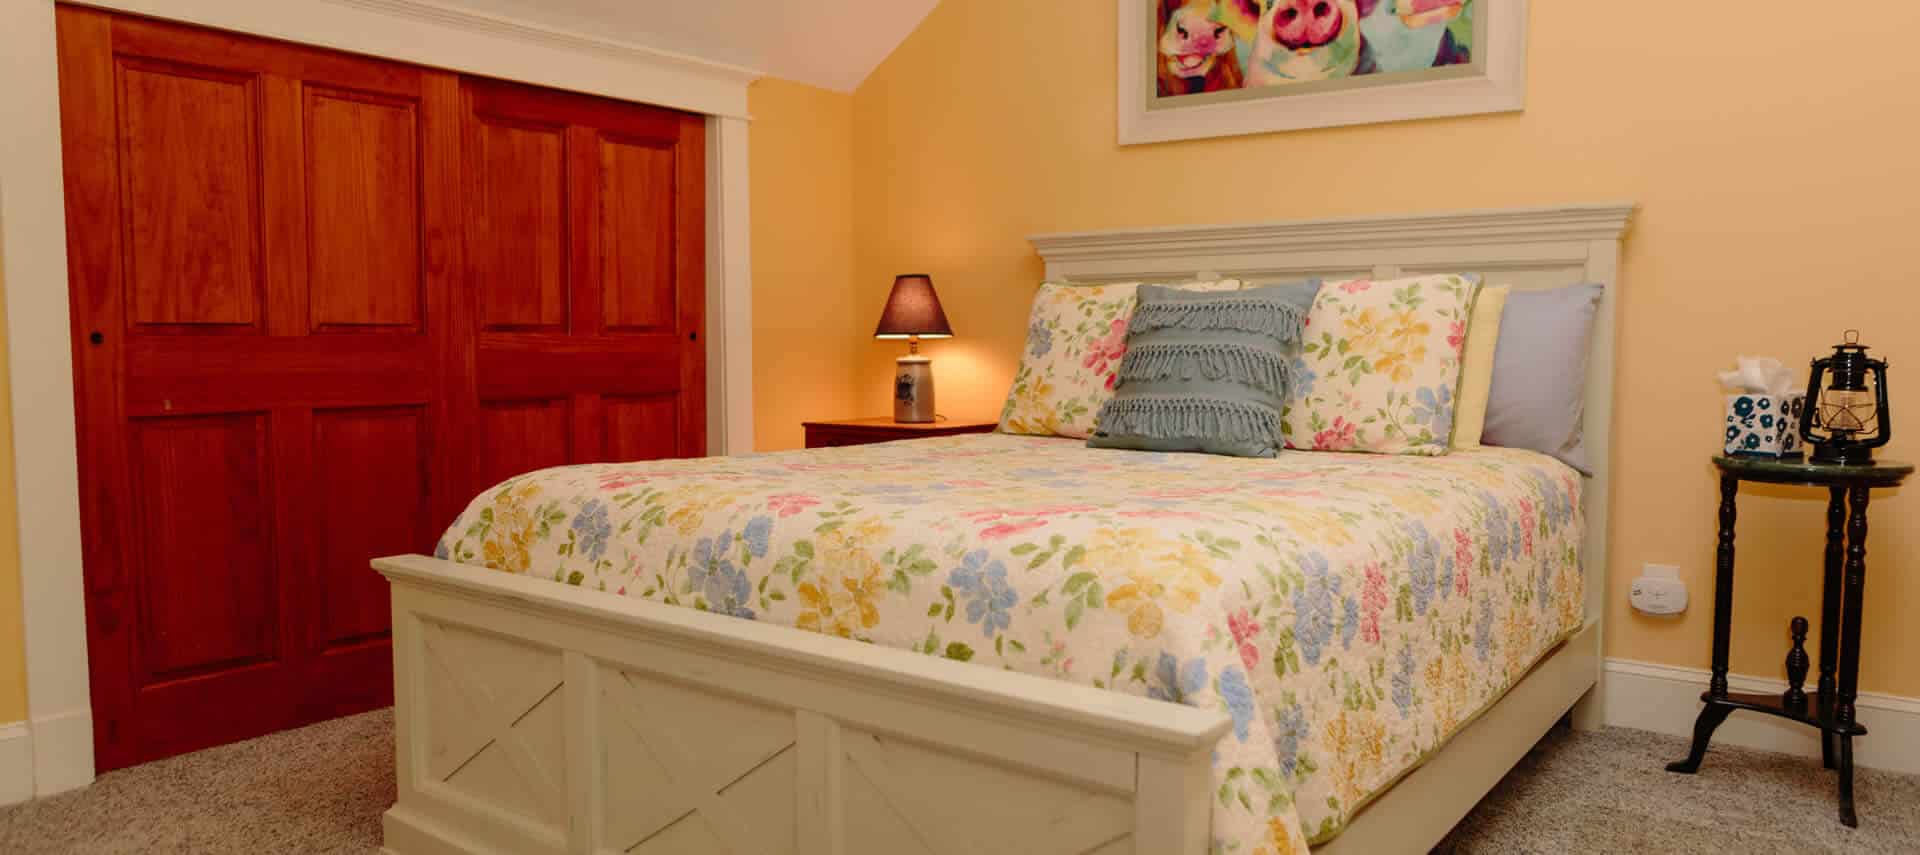 Farmhouse white sleigh bed with a flowered spread and severall pillows in a yellow bedroom.